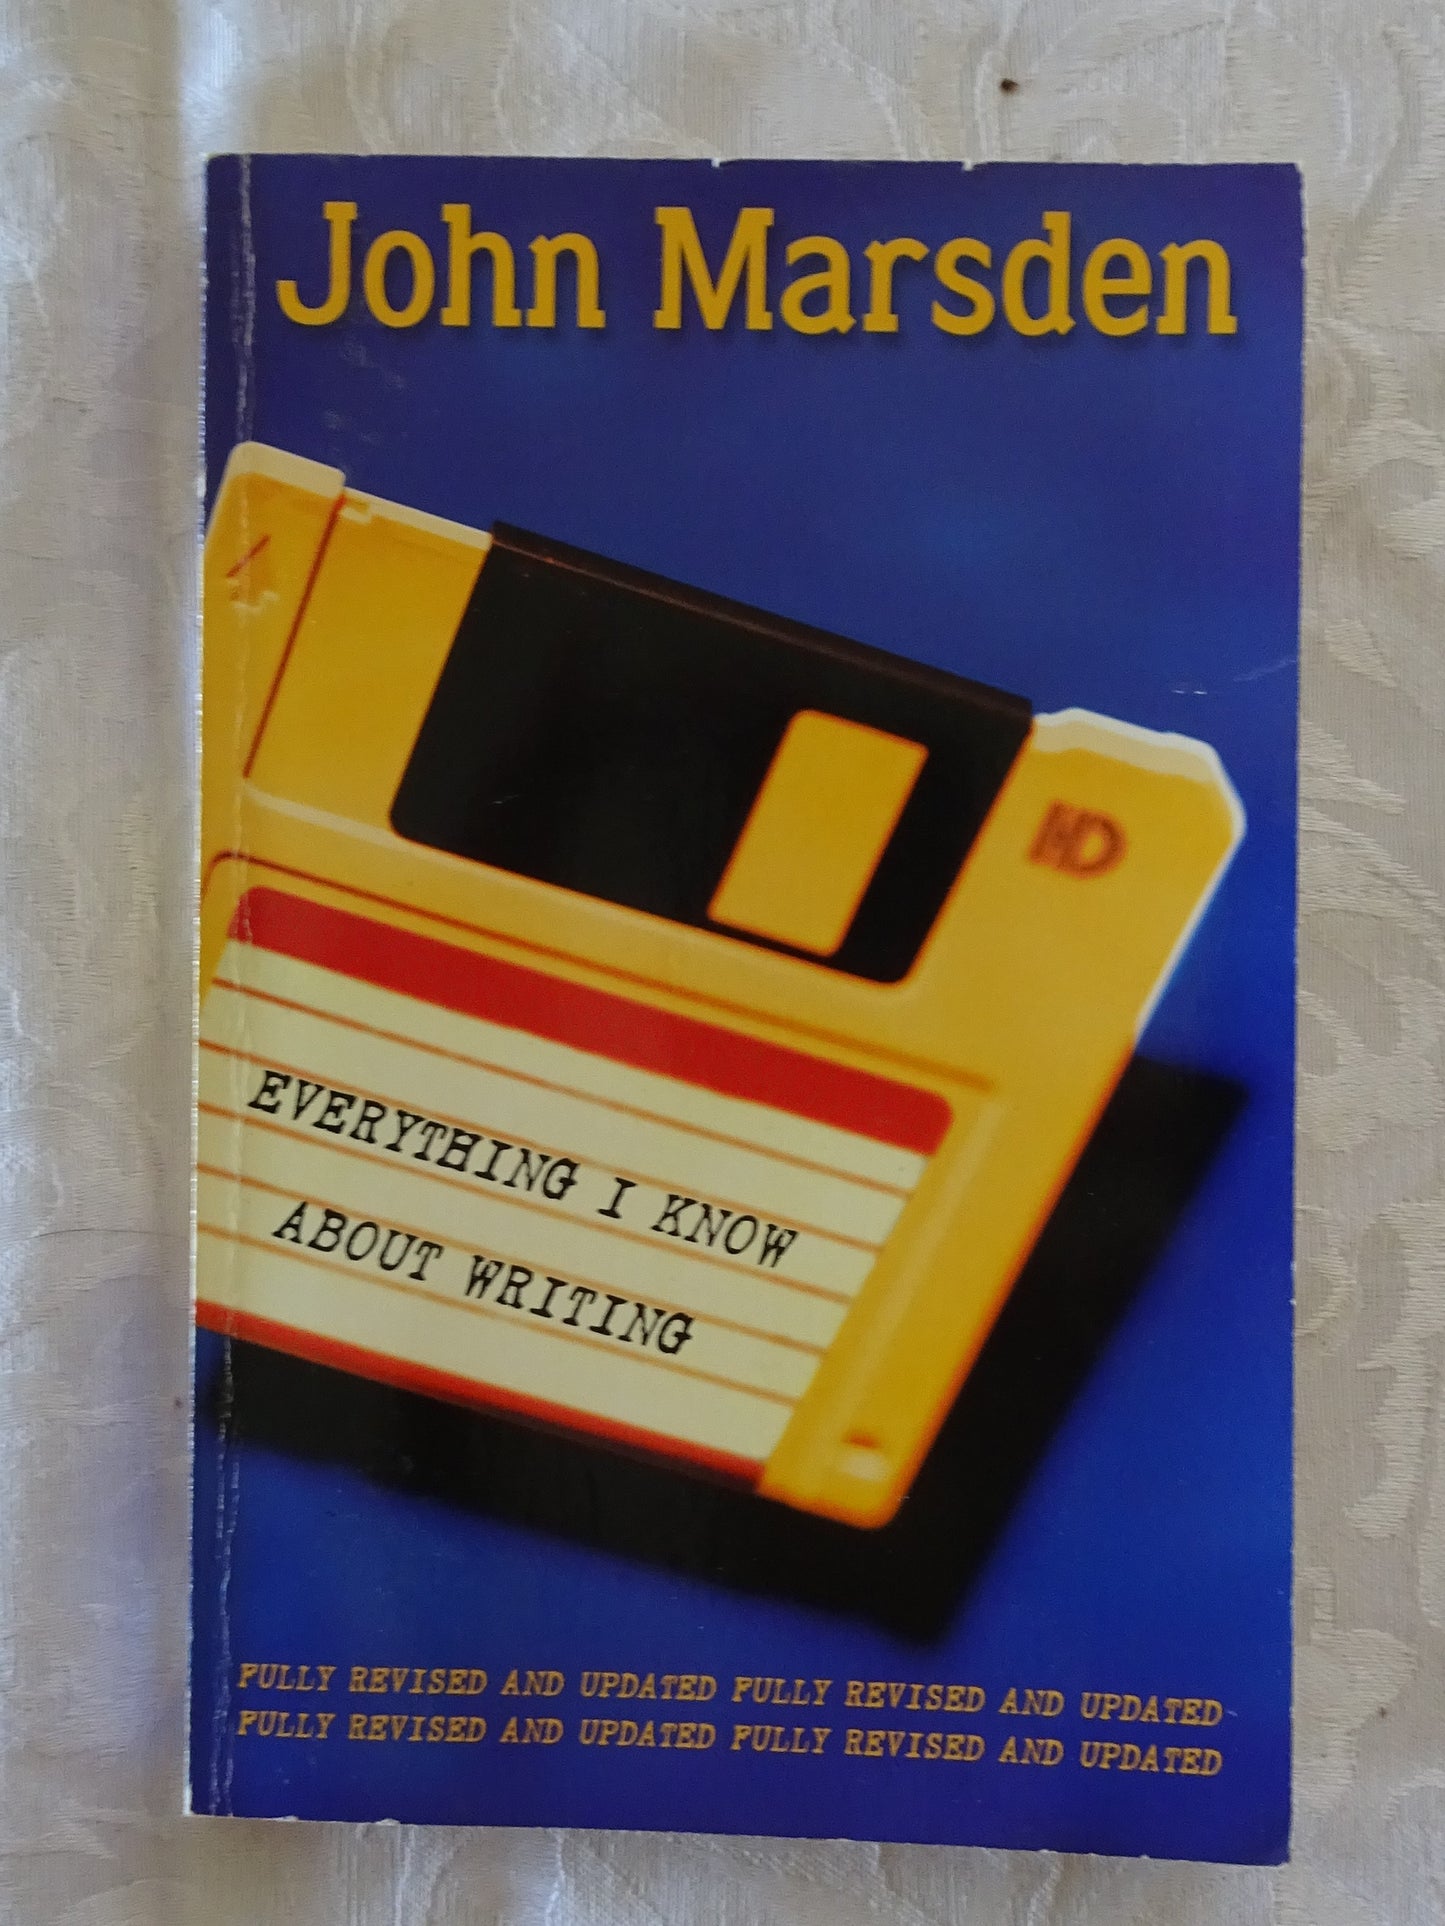 Everything I Know About Writing by John Marsden